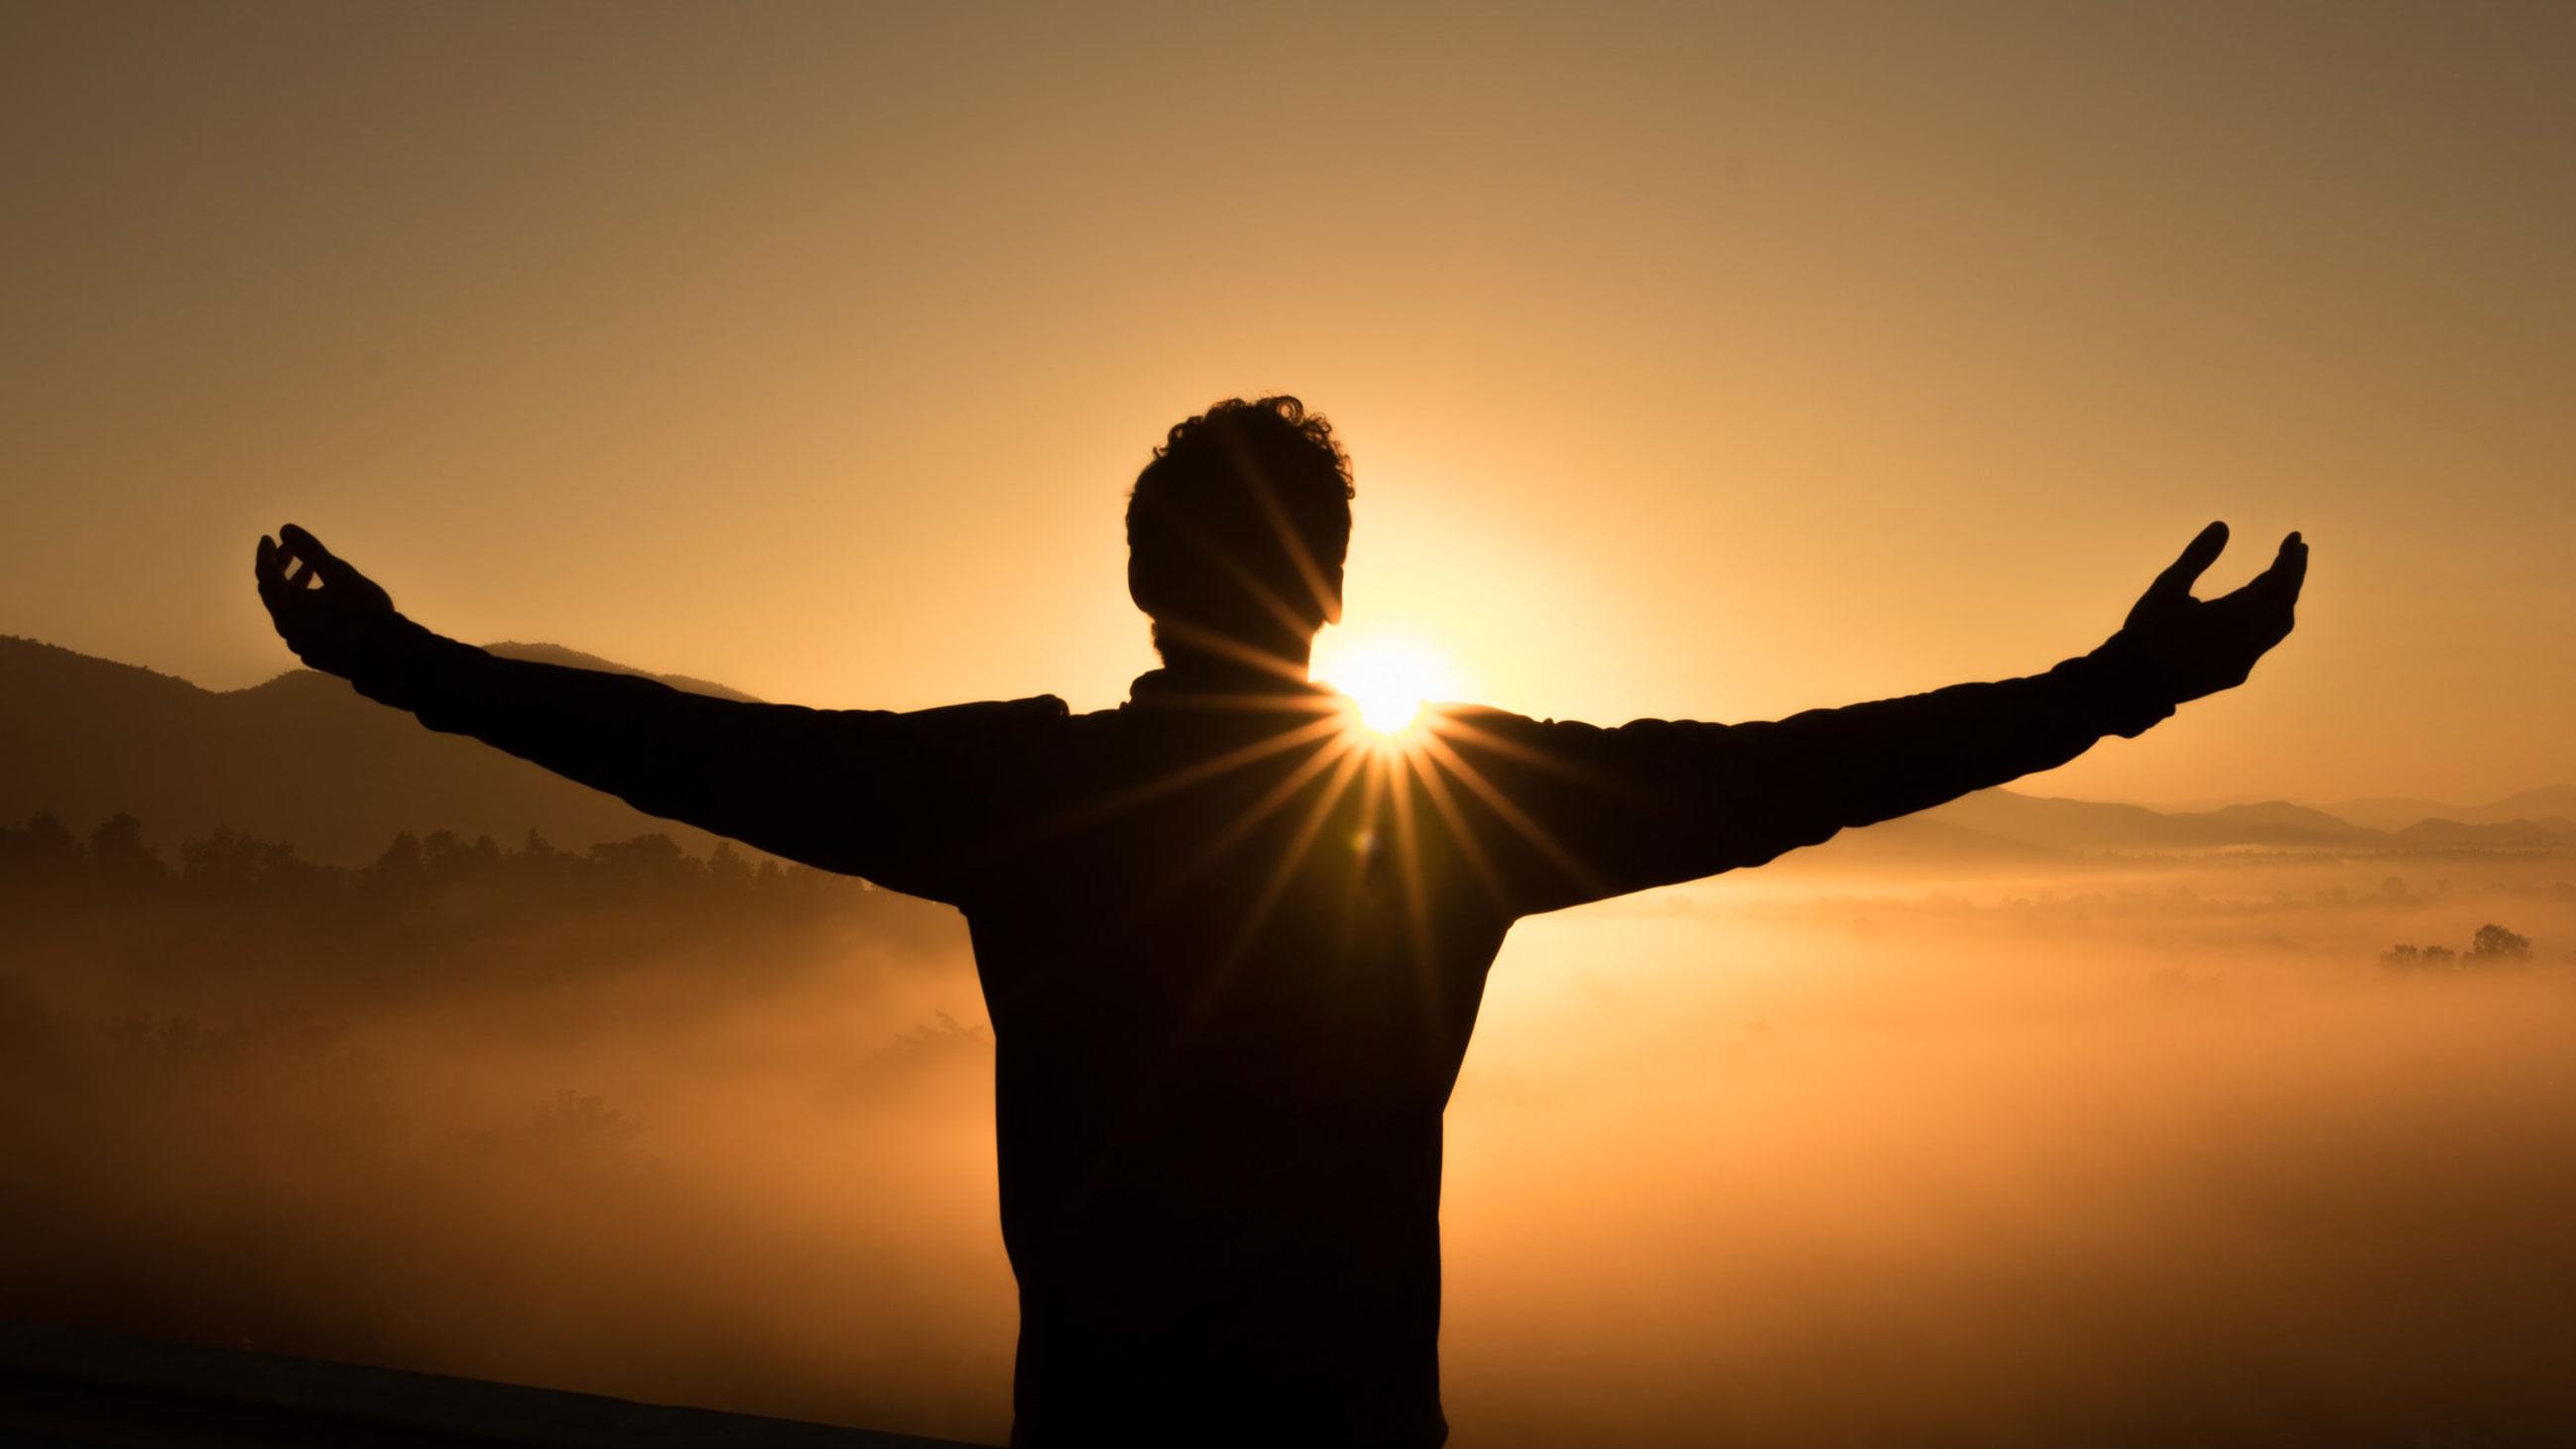 Person with open arms silhouetted against the sun